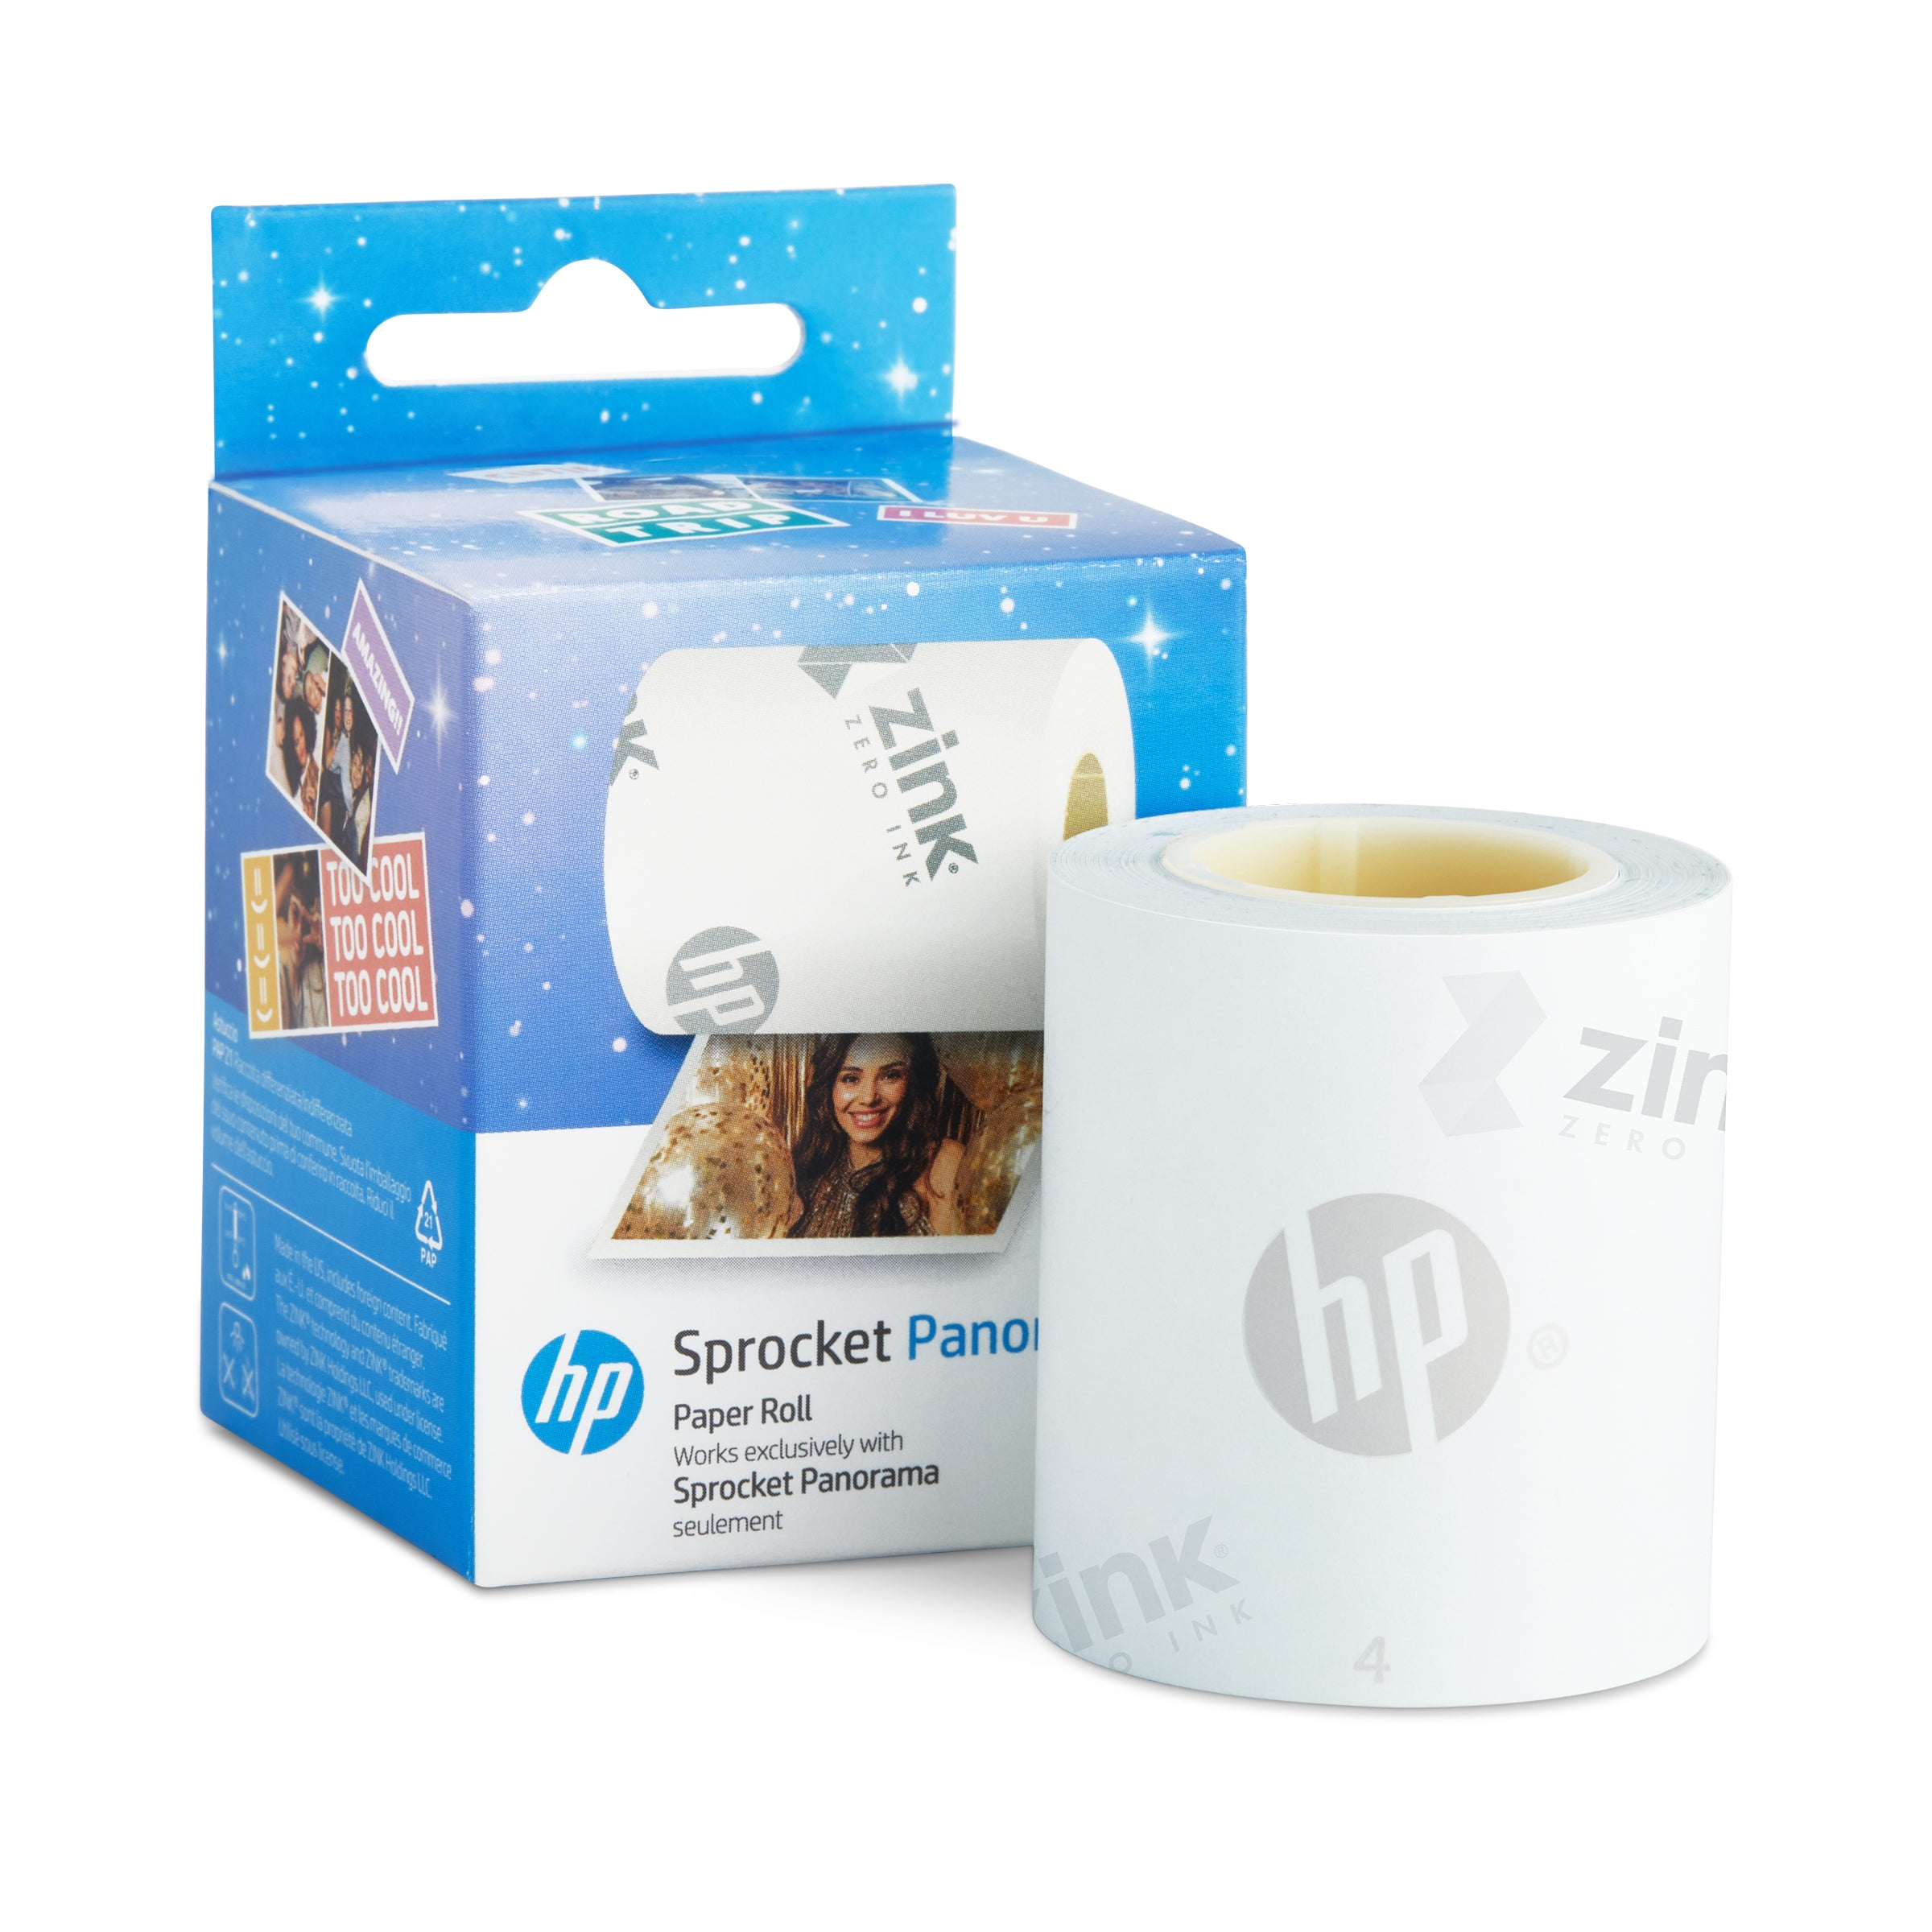 HP Sprocket Panorama Instant Portable Color Label & Photo Printer (Pink) Starter Bundle with case and HP Zink roll Sprocket Printers CA